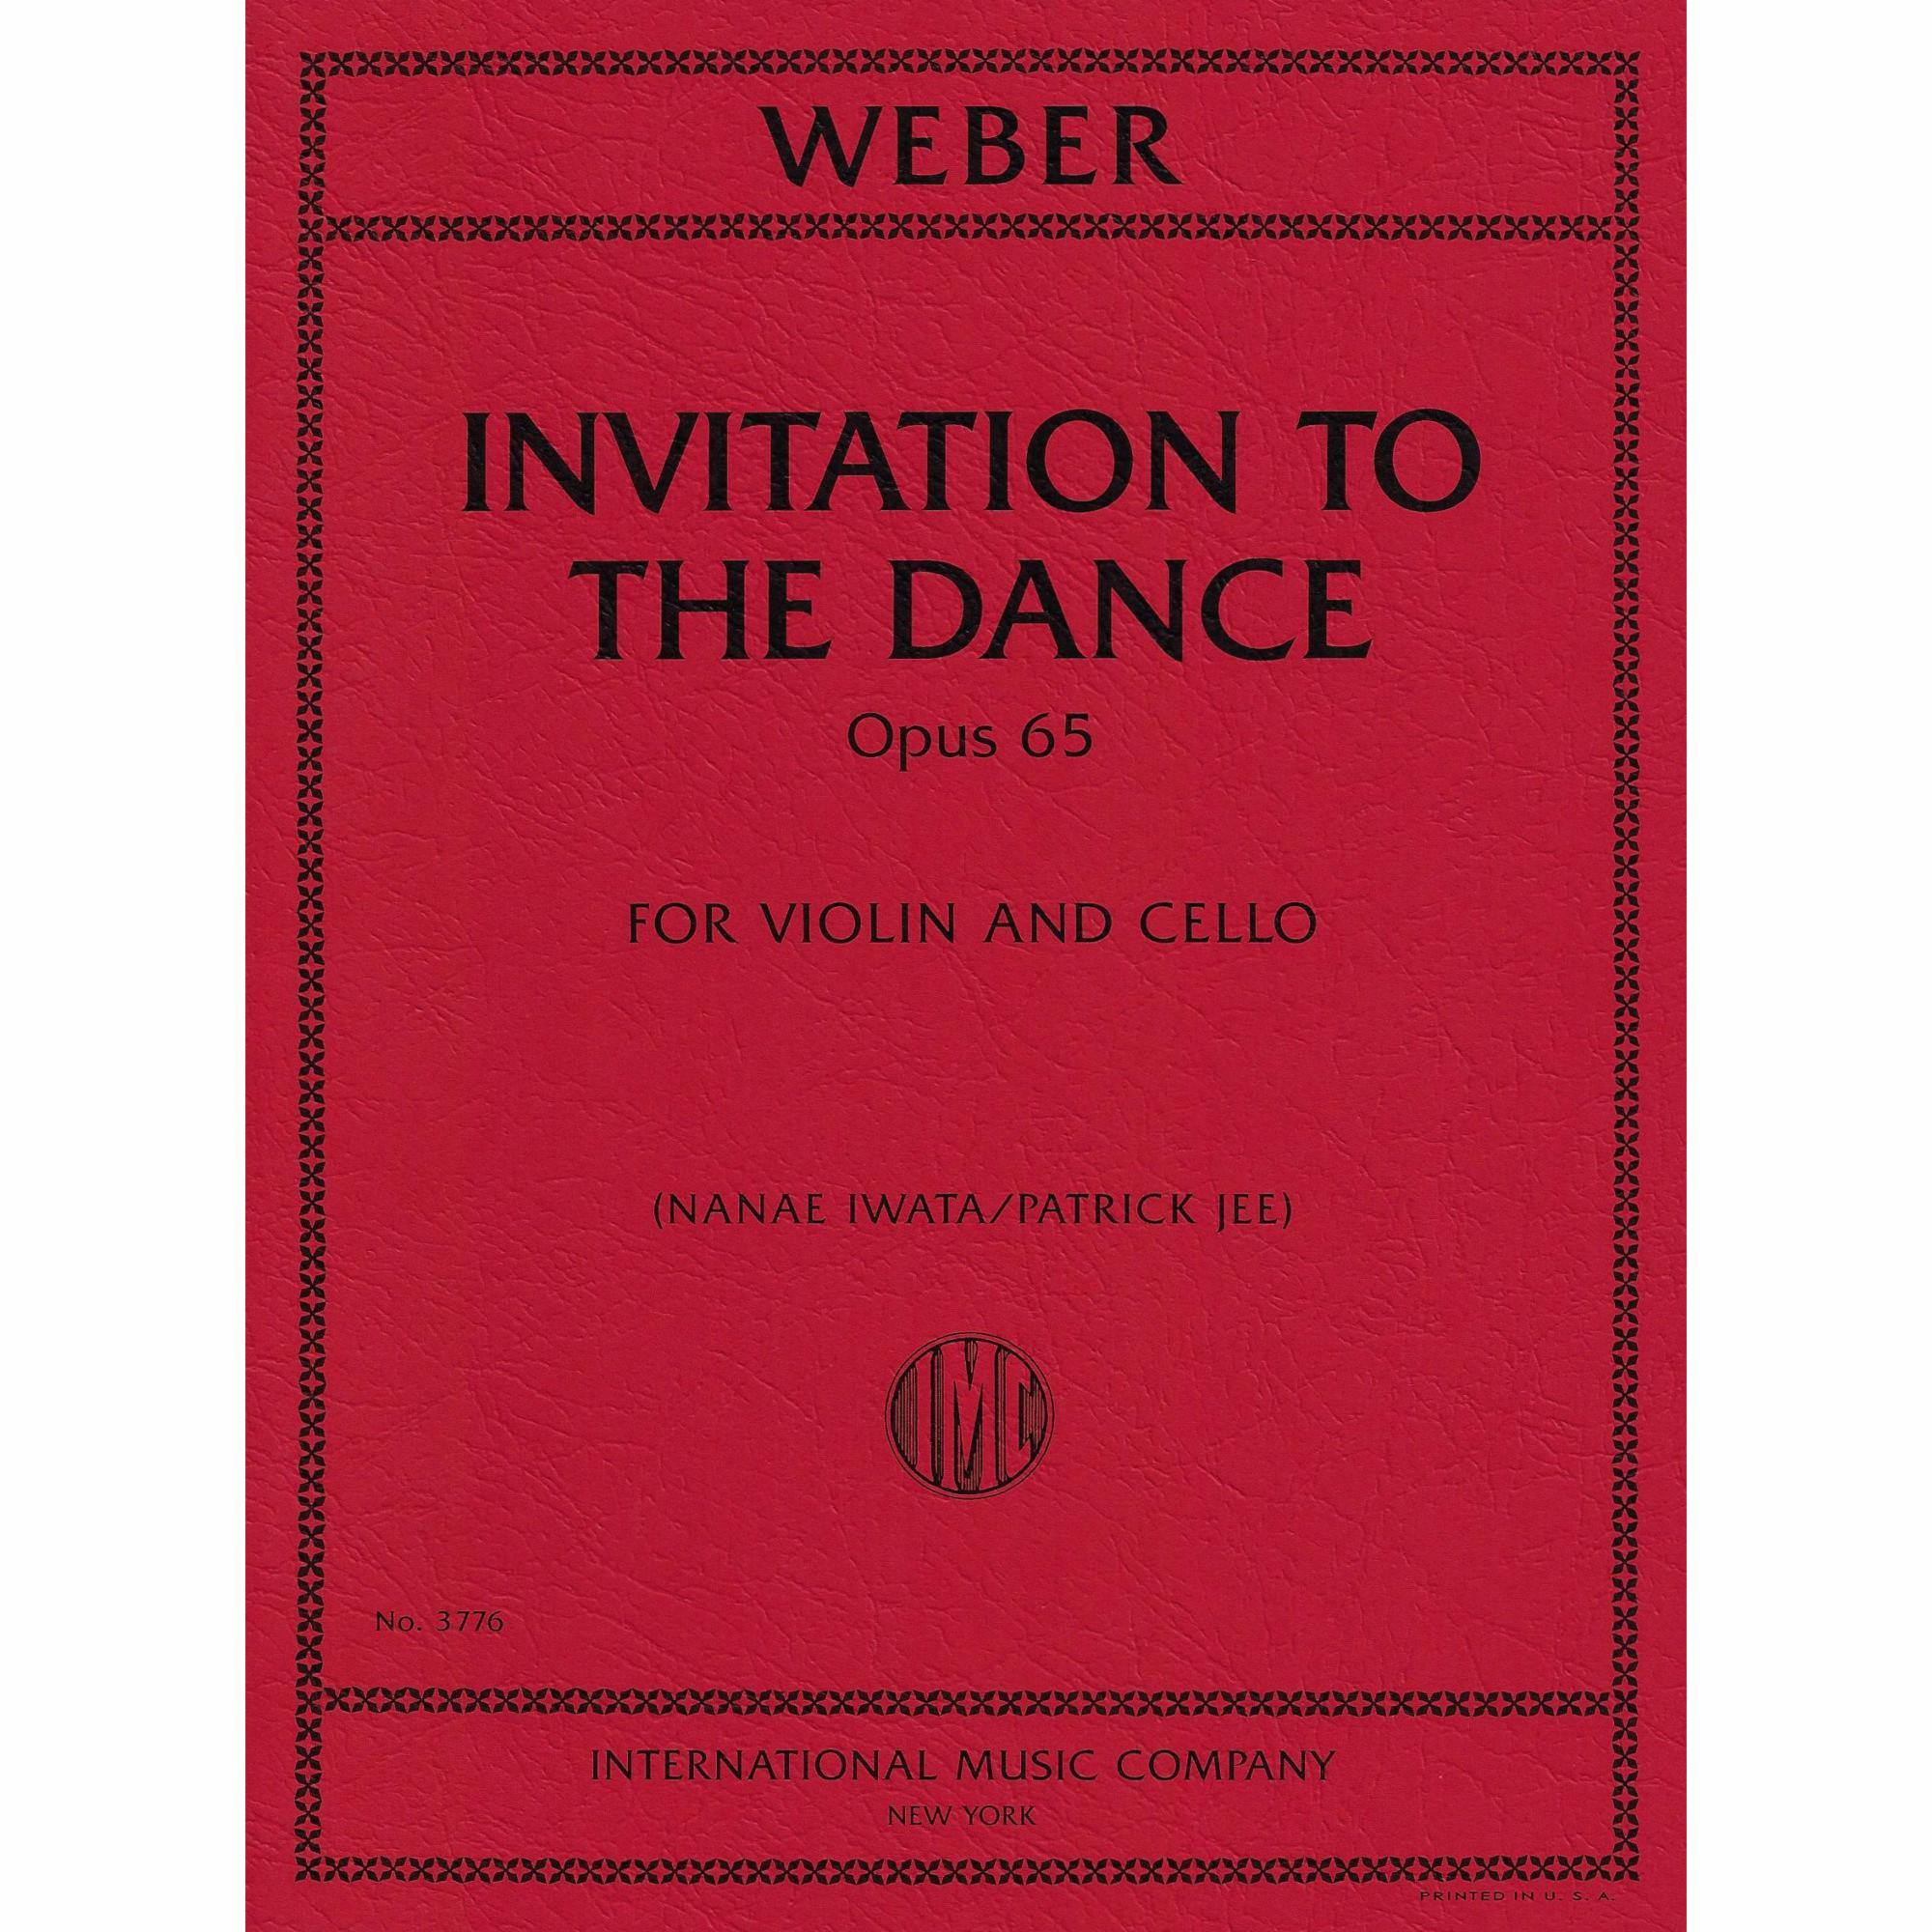 Weber -- Invitation to the Dance, Op. 65 for Violin and Cello